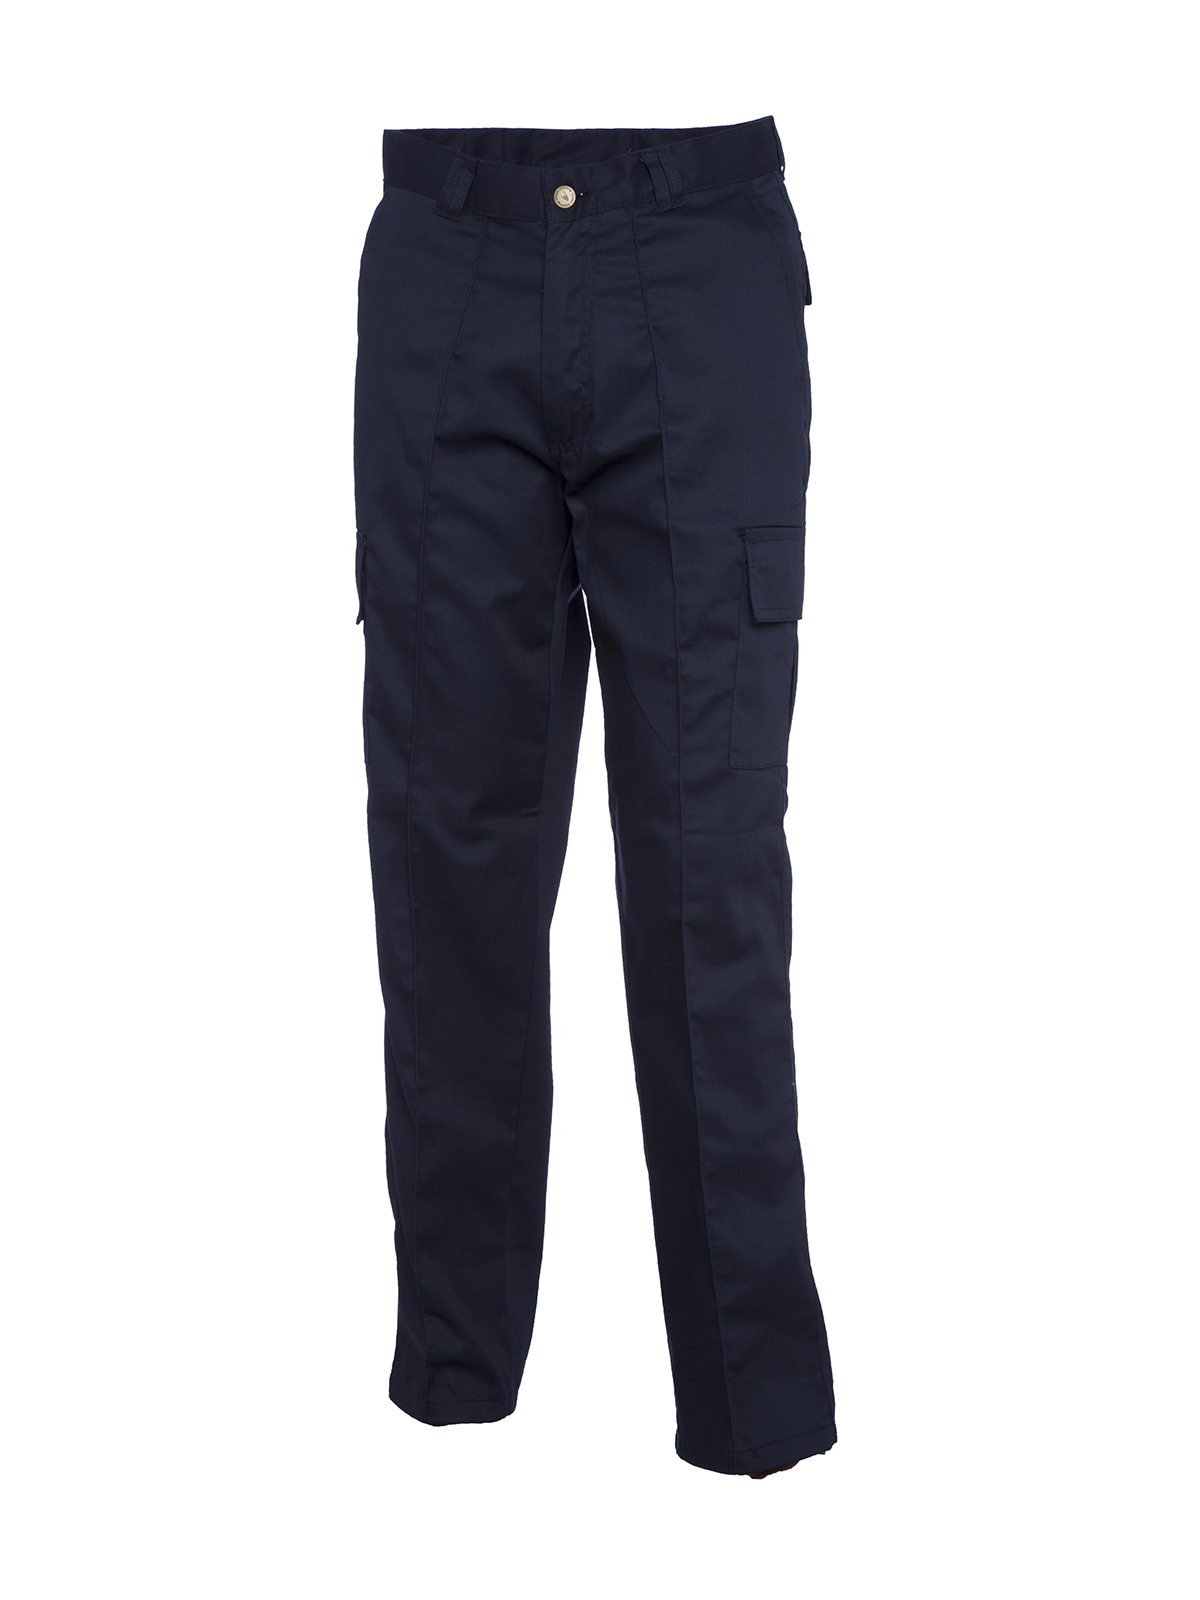 Cargo Trousers, Navy Blue - 36R